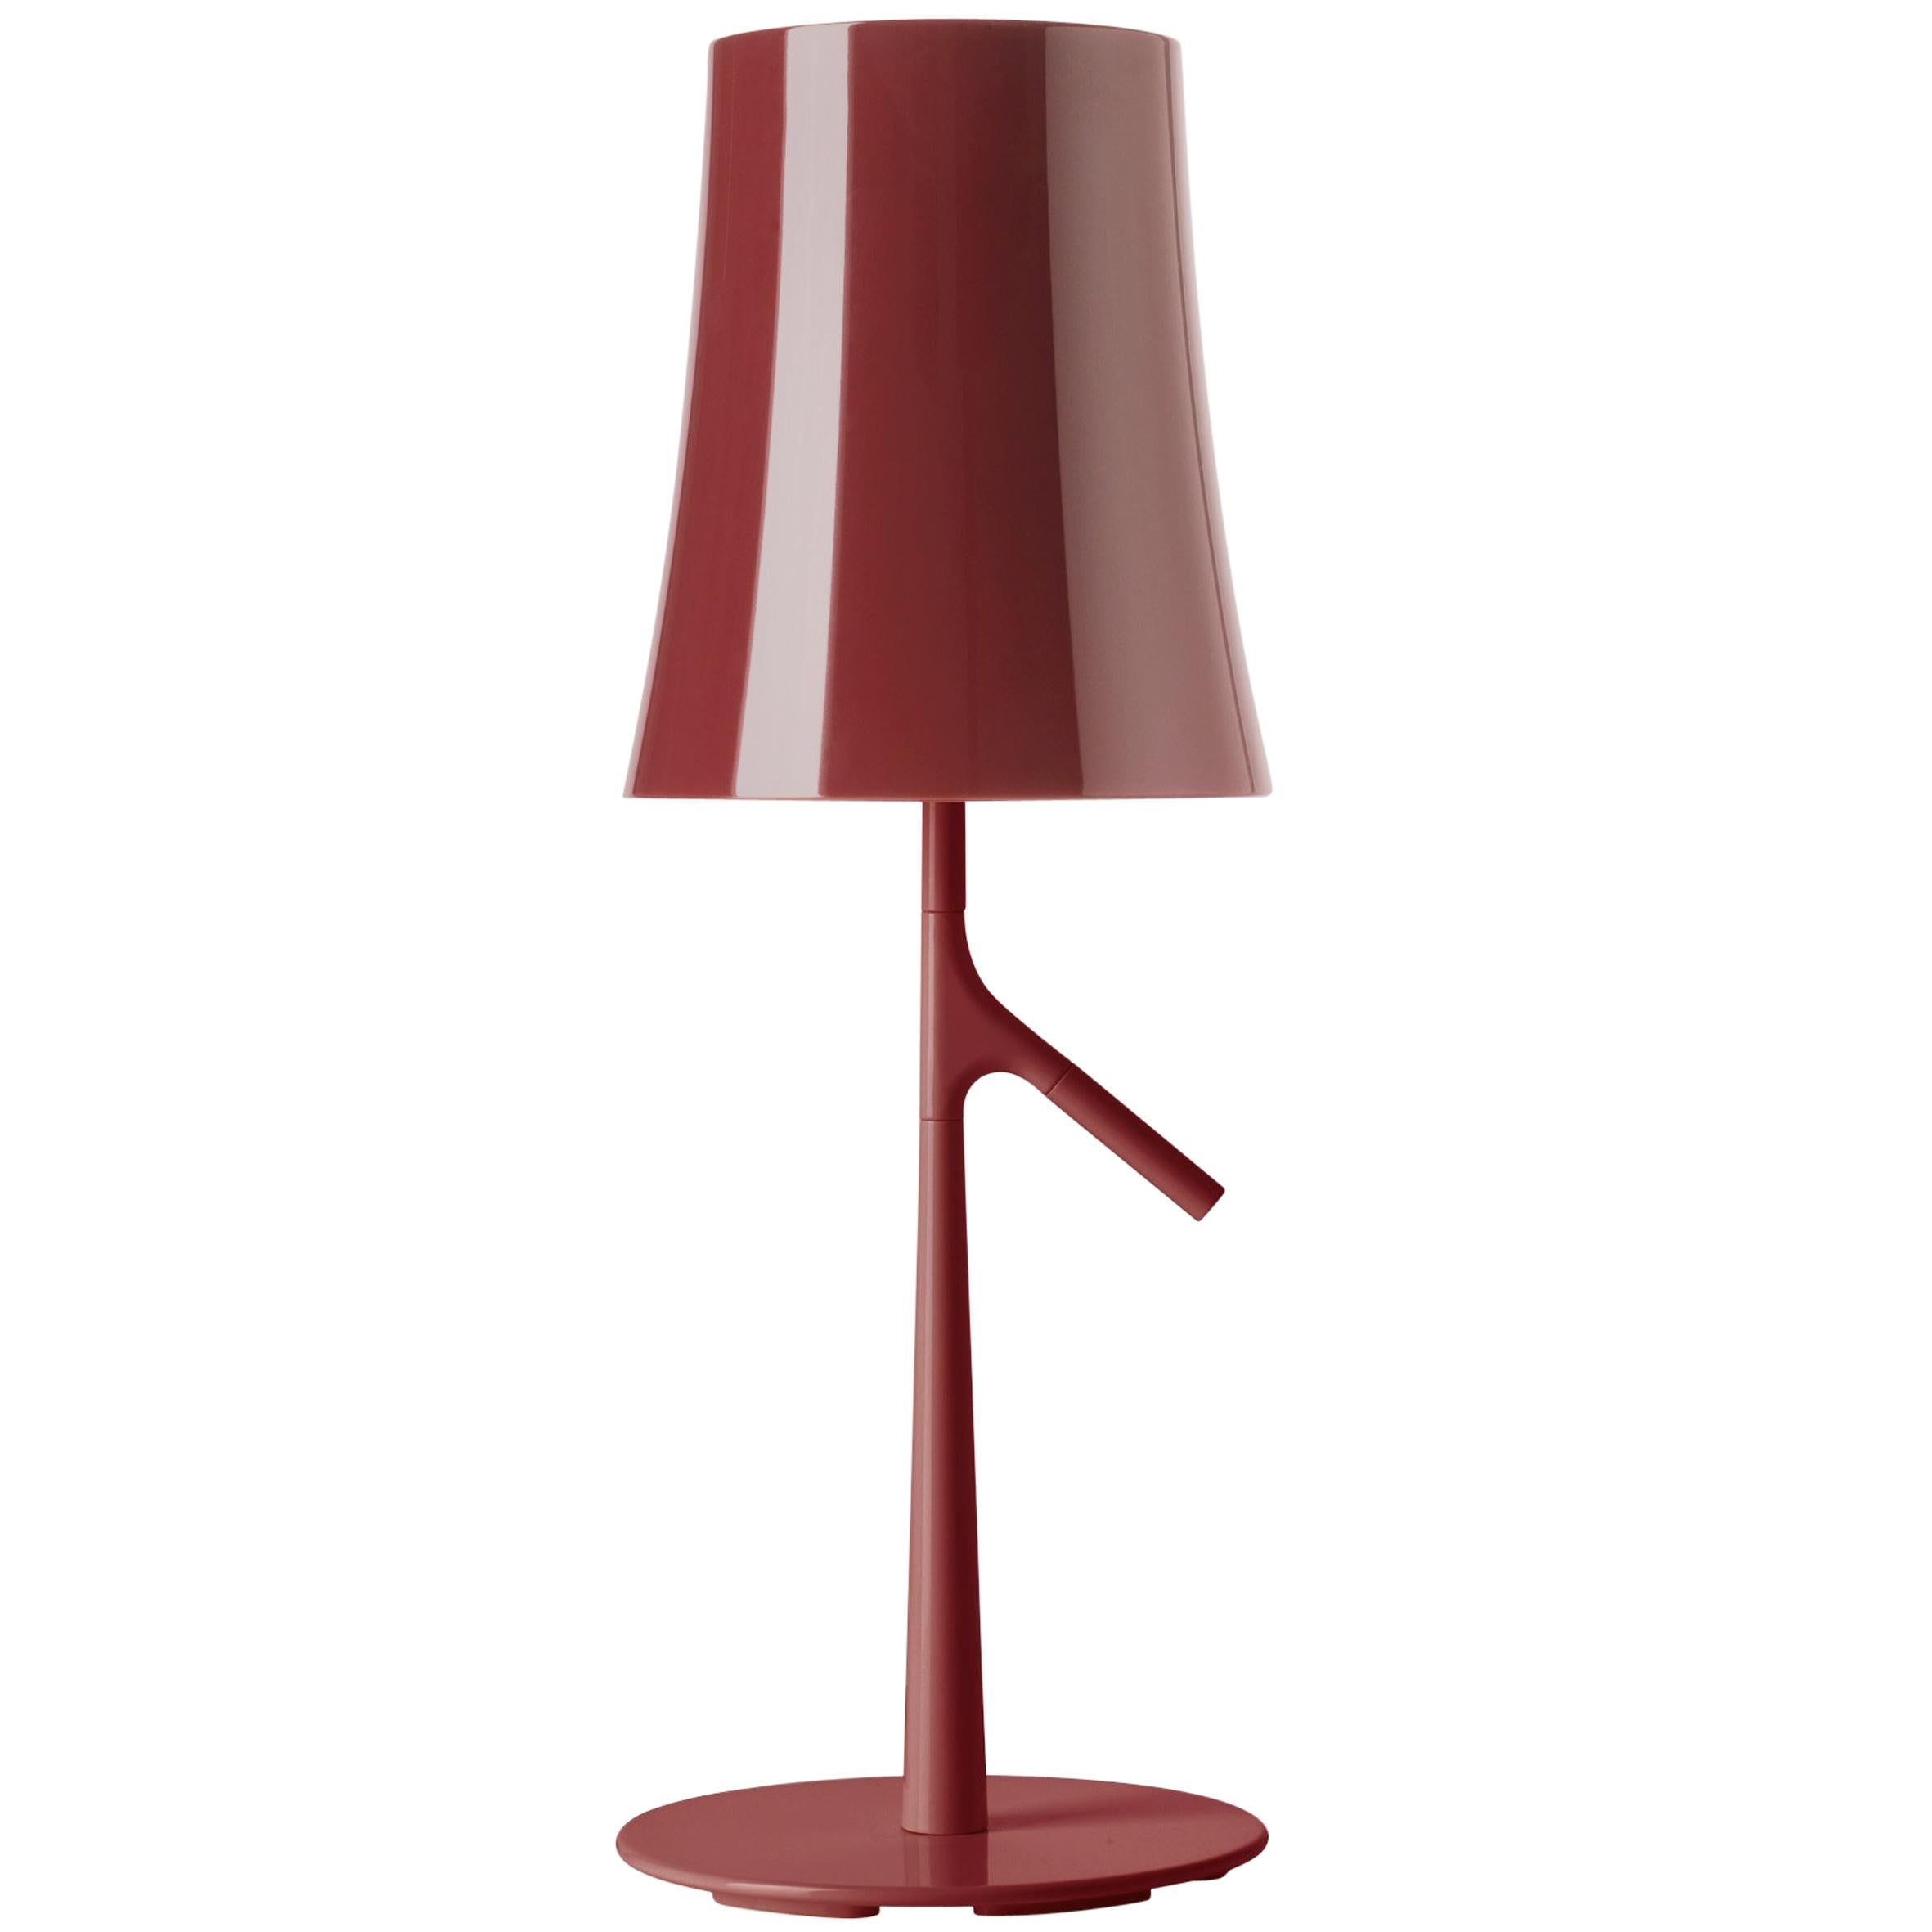 Foscarini Small Dimmable Amaranth Birdie Table Lamp by Ludovica & Roberto Palomb